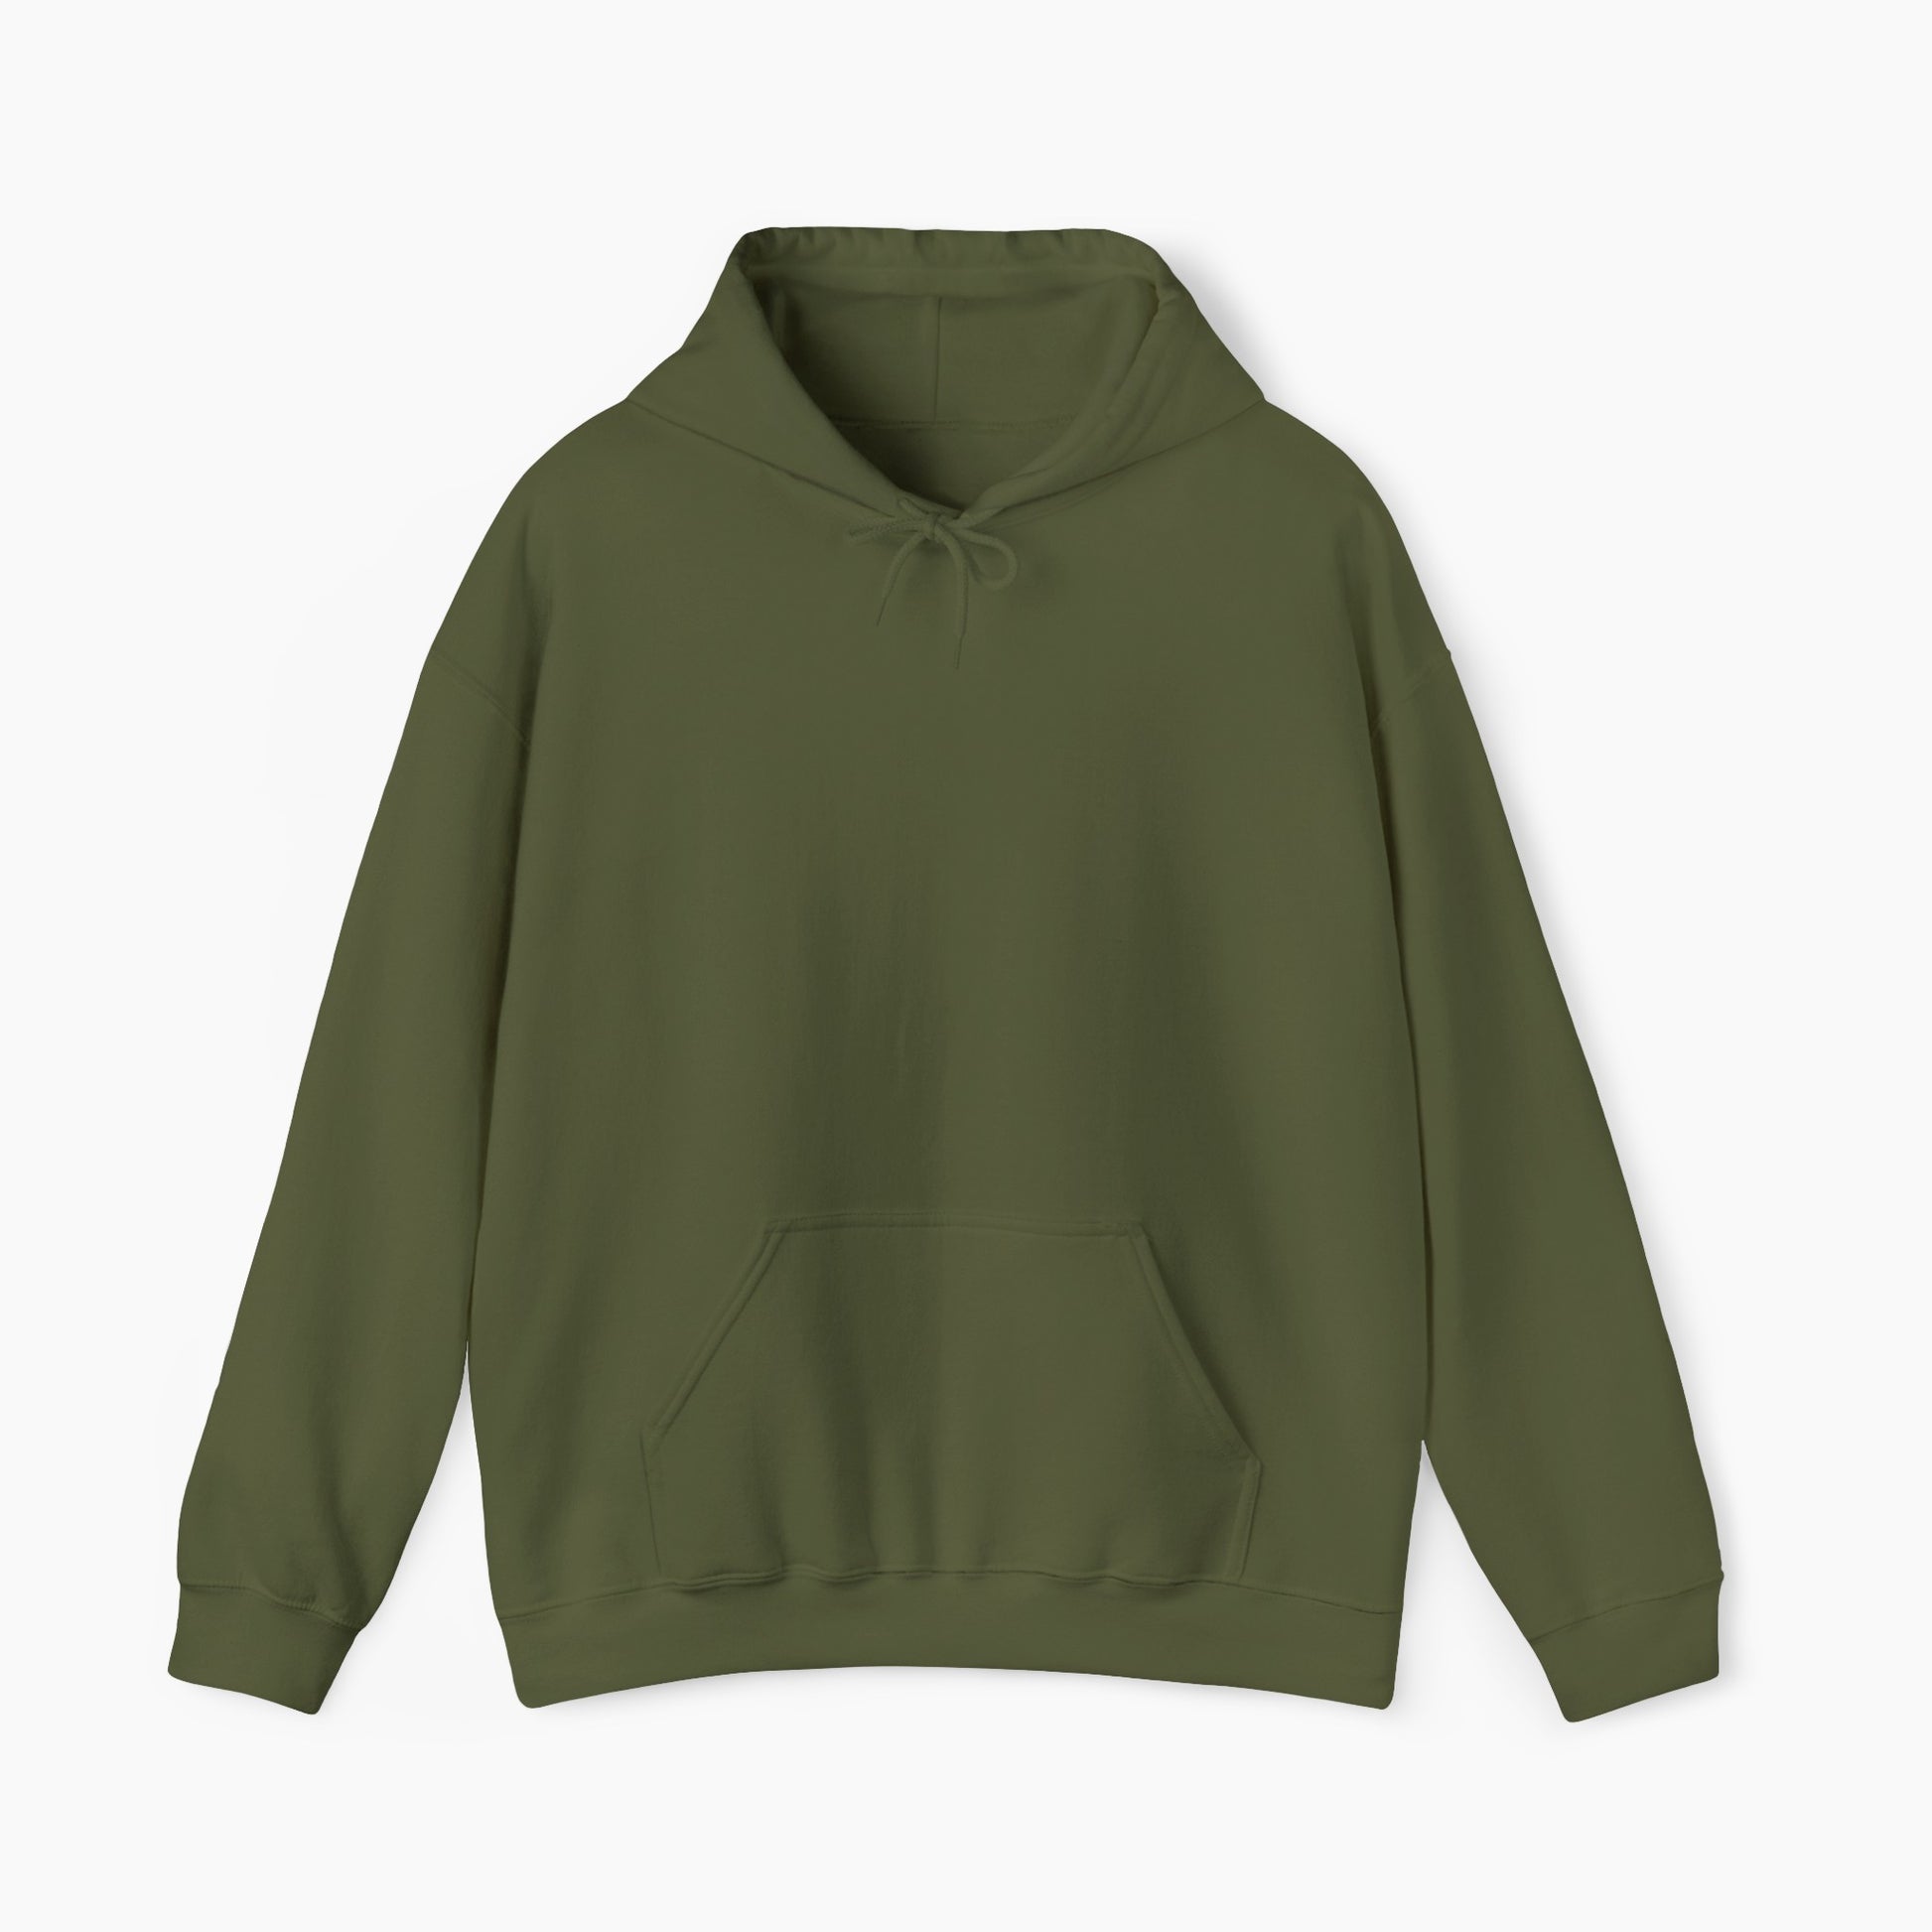 Front view of a plain military green hoodie on a plain background.